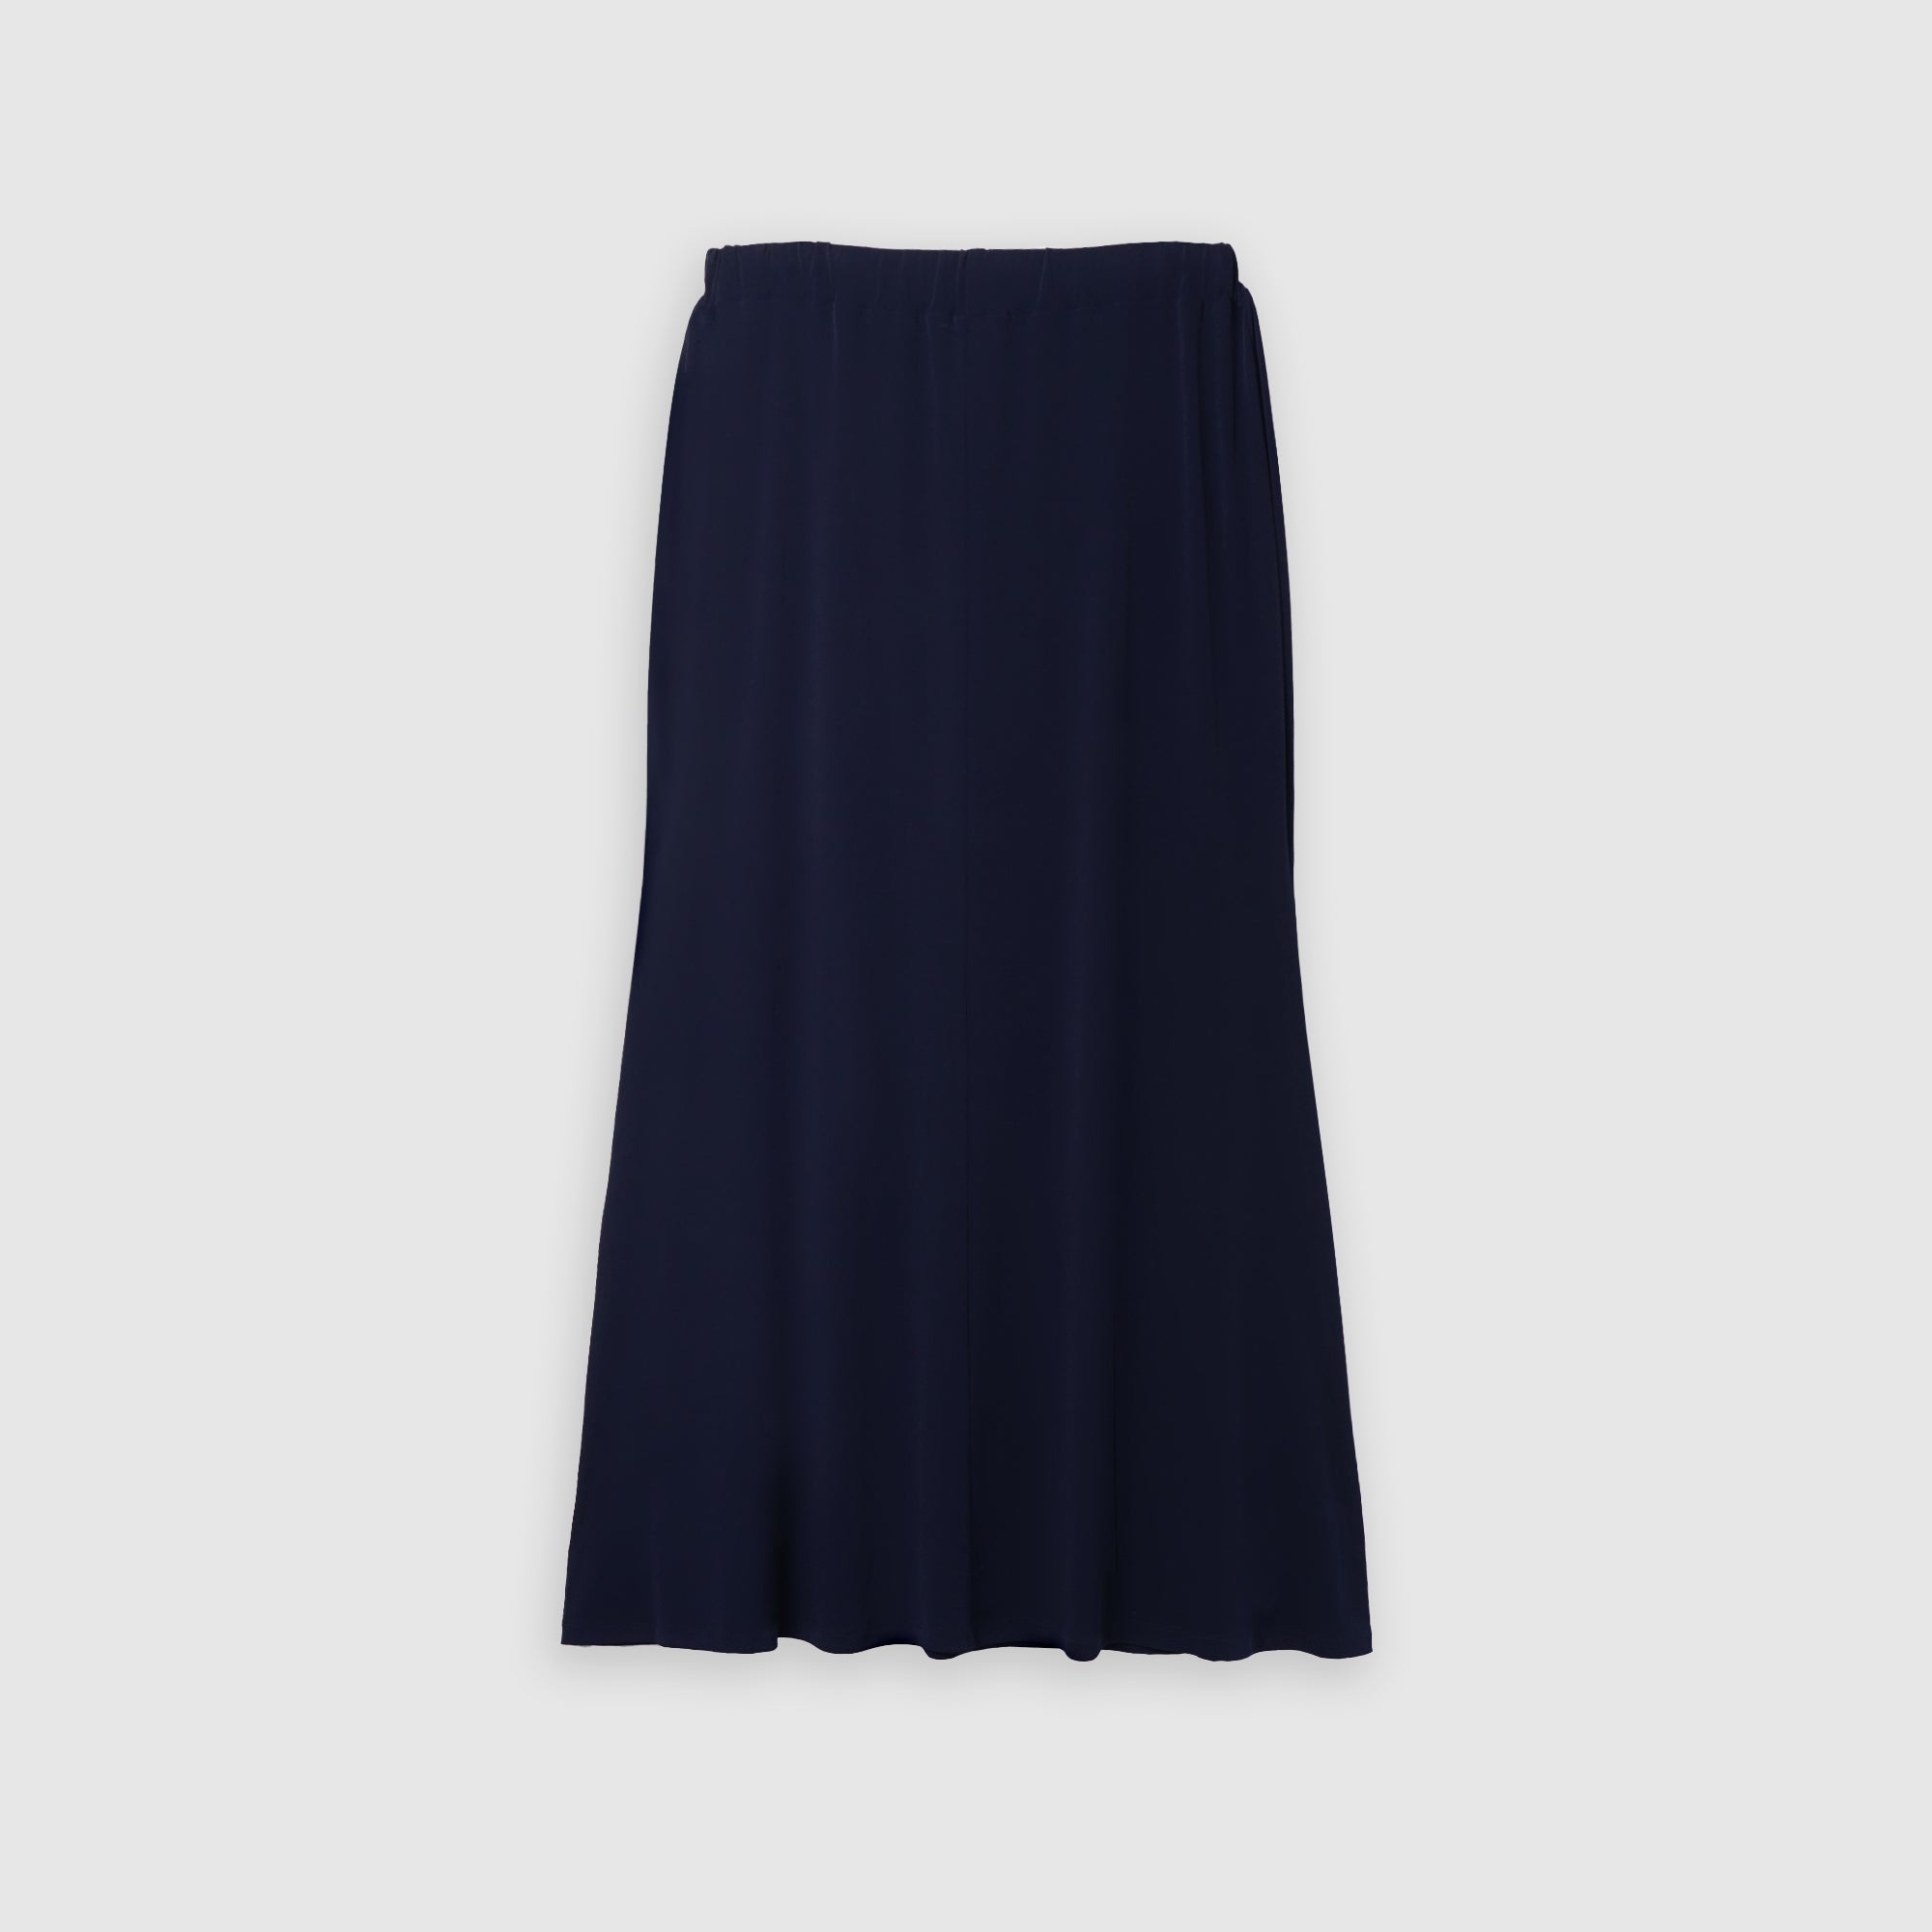 Essential Fit & Flare Skirt